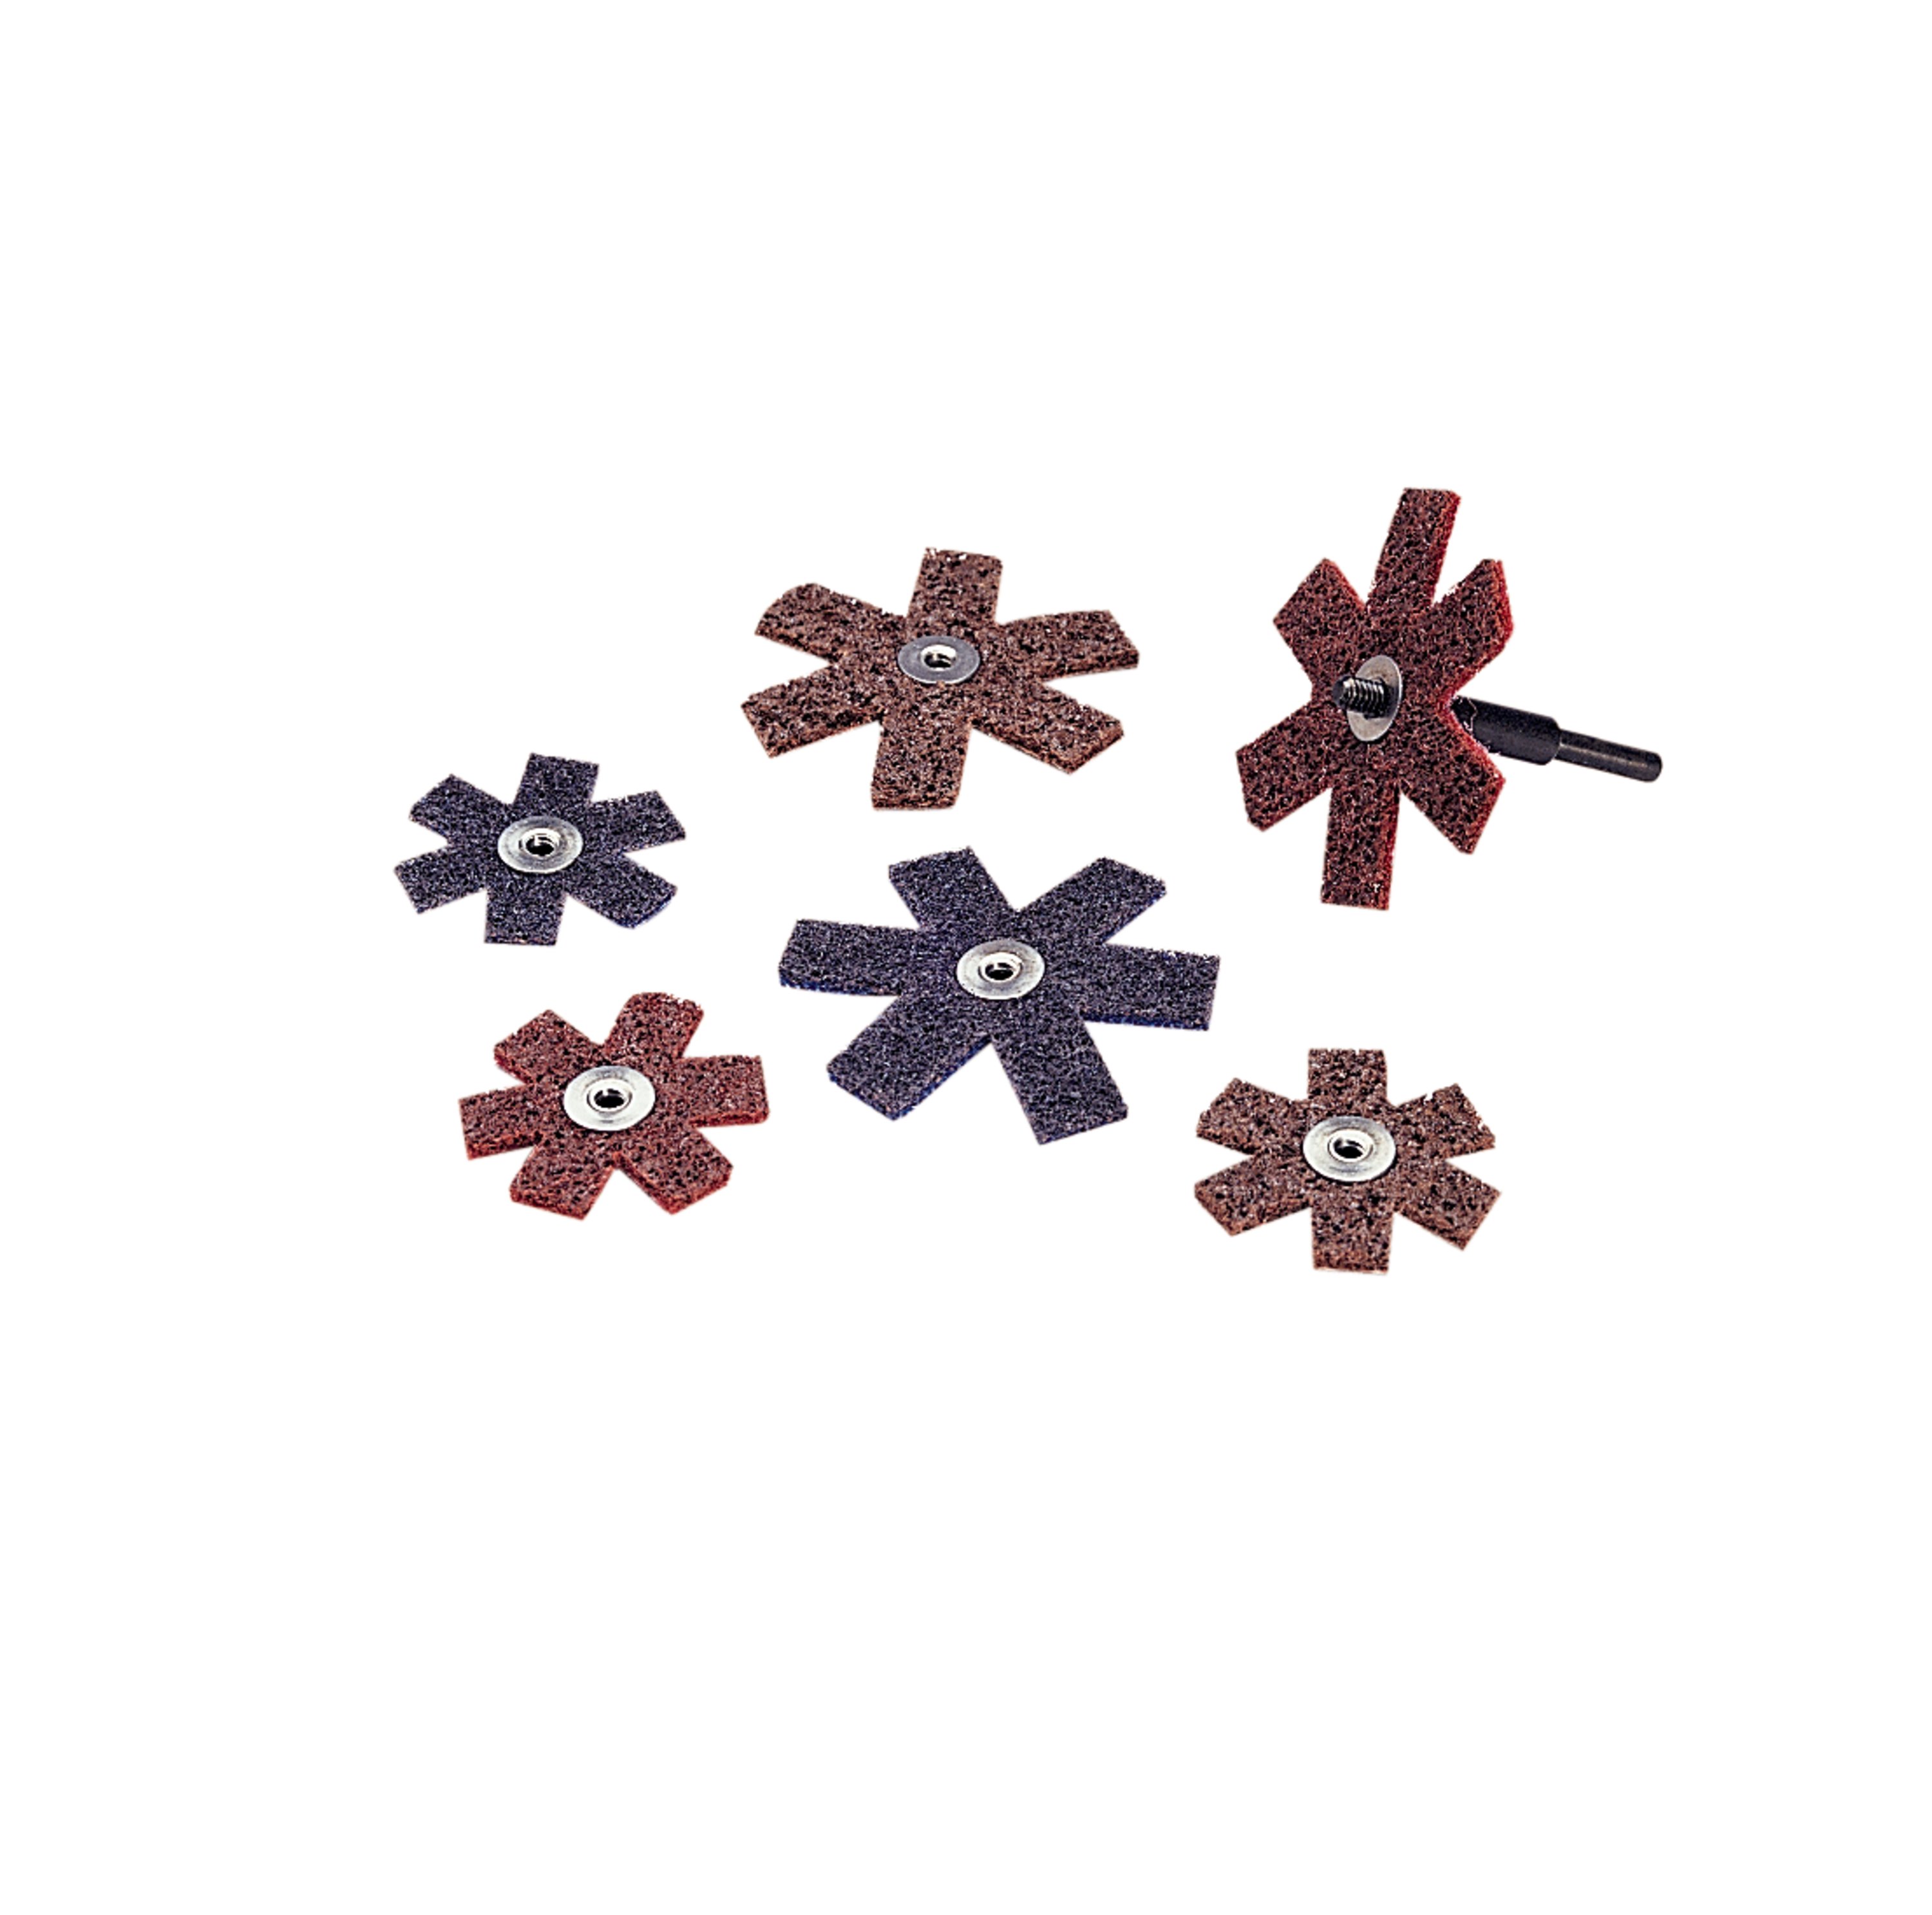 The Standard Abrasives™ Surface Conditioning Star comes in small sizes to fit interior diameters, with the smallest diameter being 1-1/2 inches and the largest diameter being 4 inches